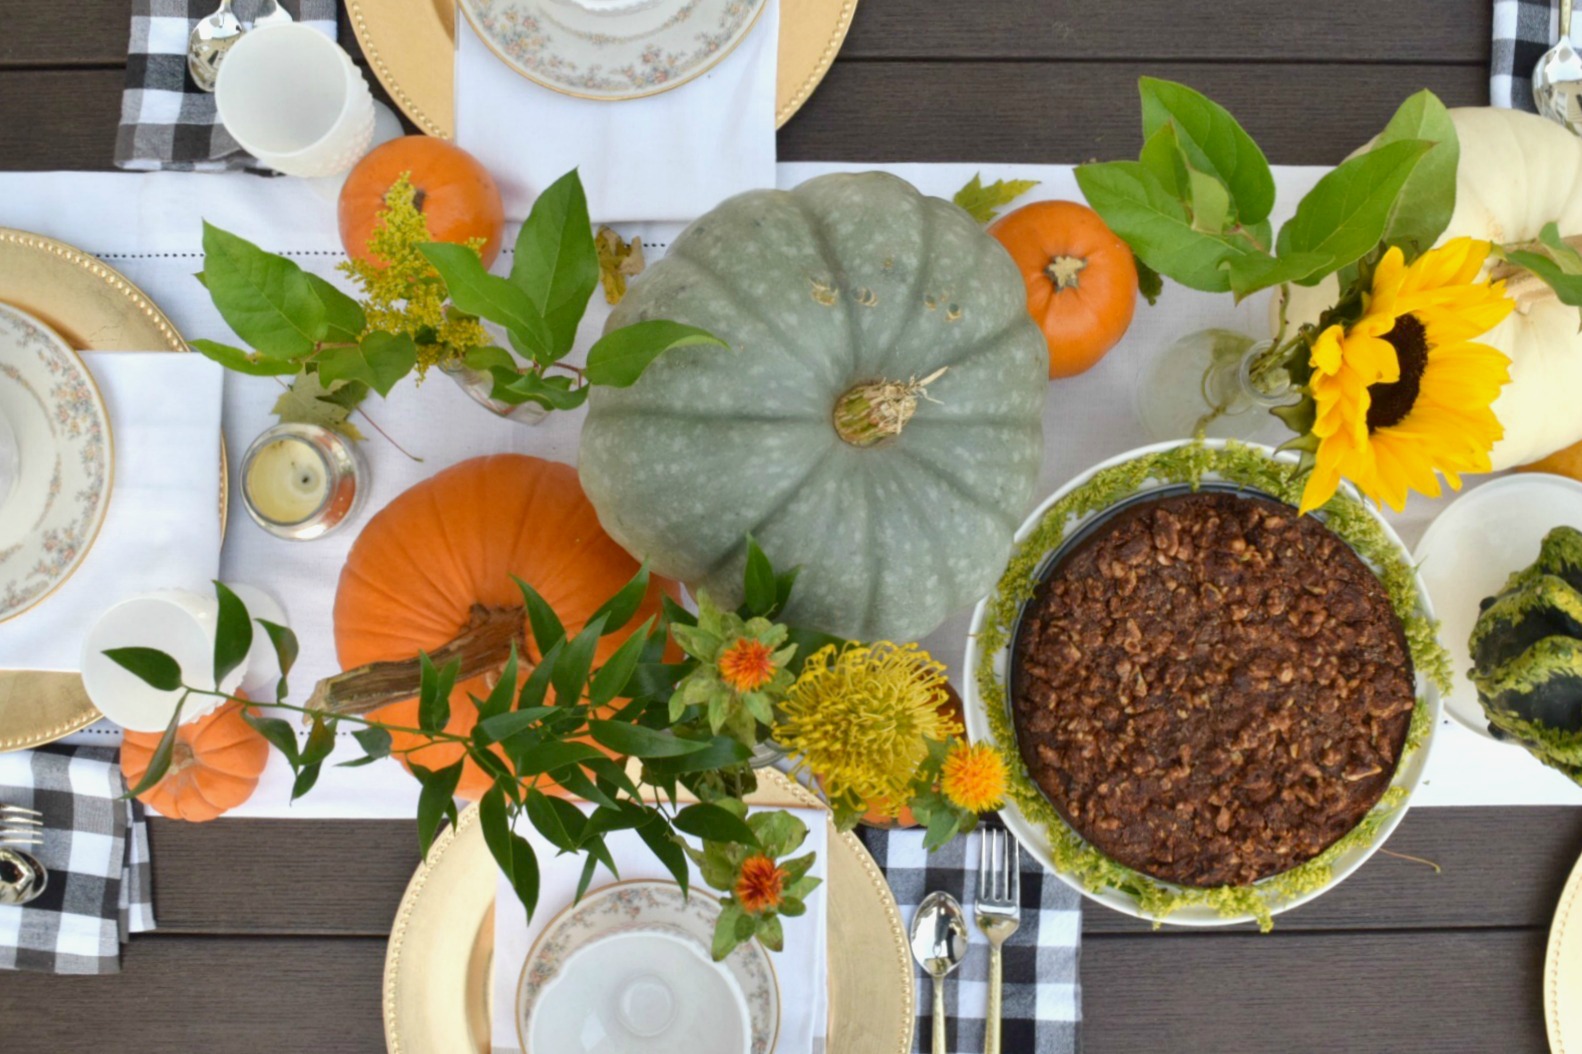 Fall Table Setting- Simple Using What You Have